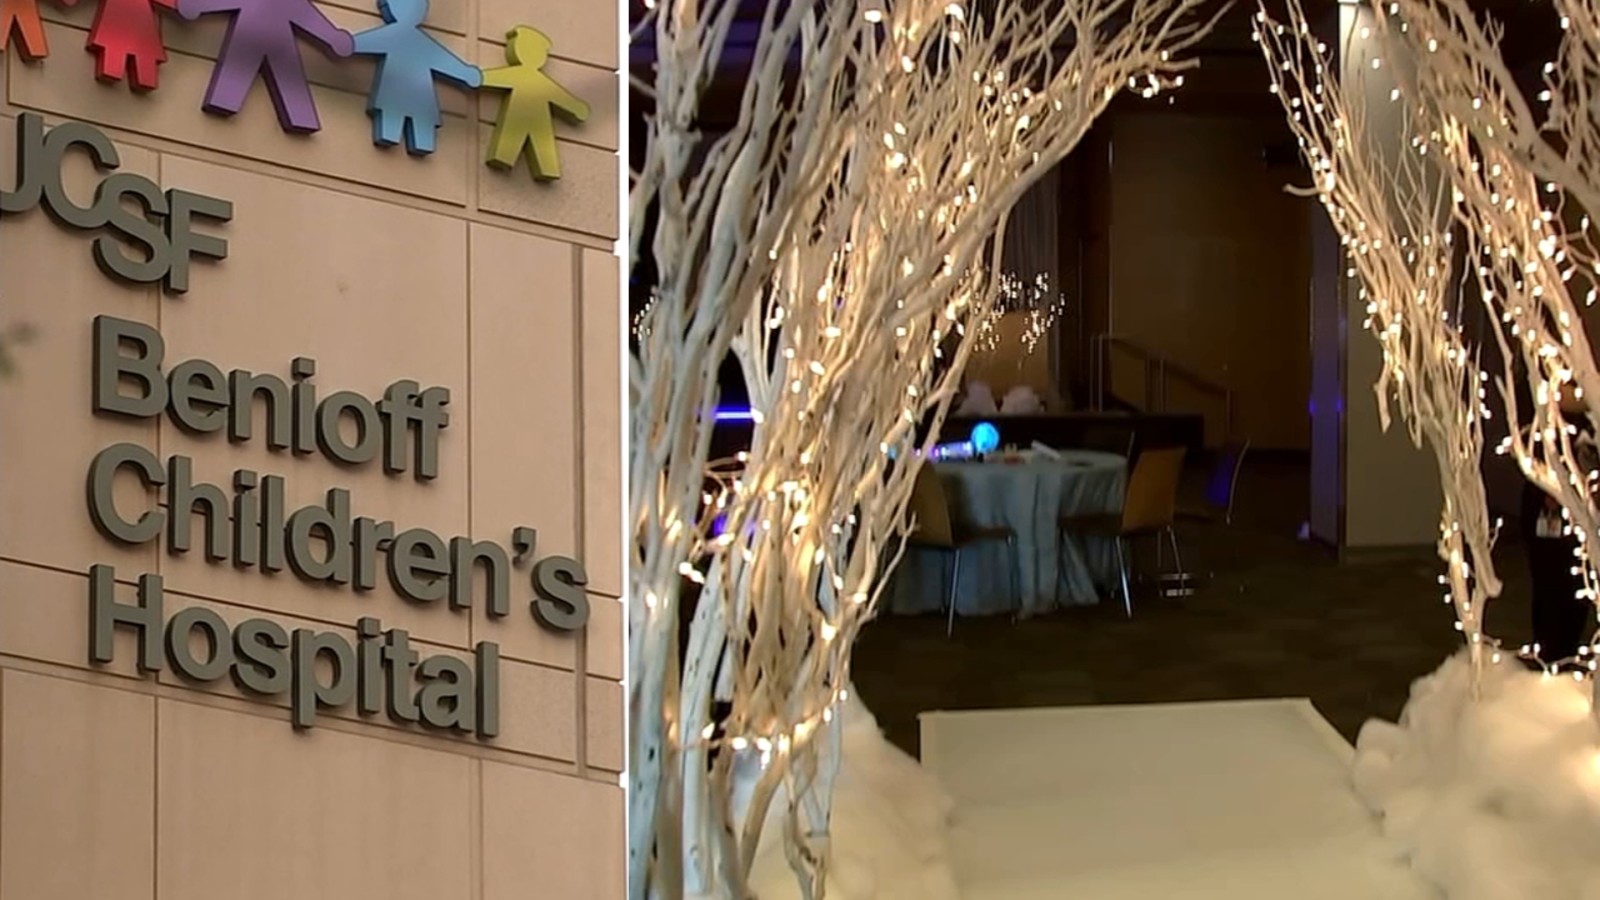 UCSF Benioff Children's Hospital in SF and Oakland hold special prom for teens: 'Very heartwarming'